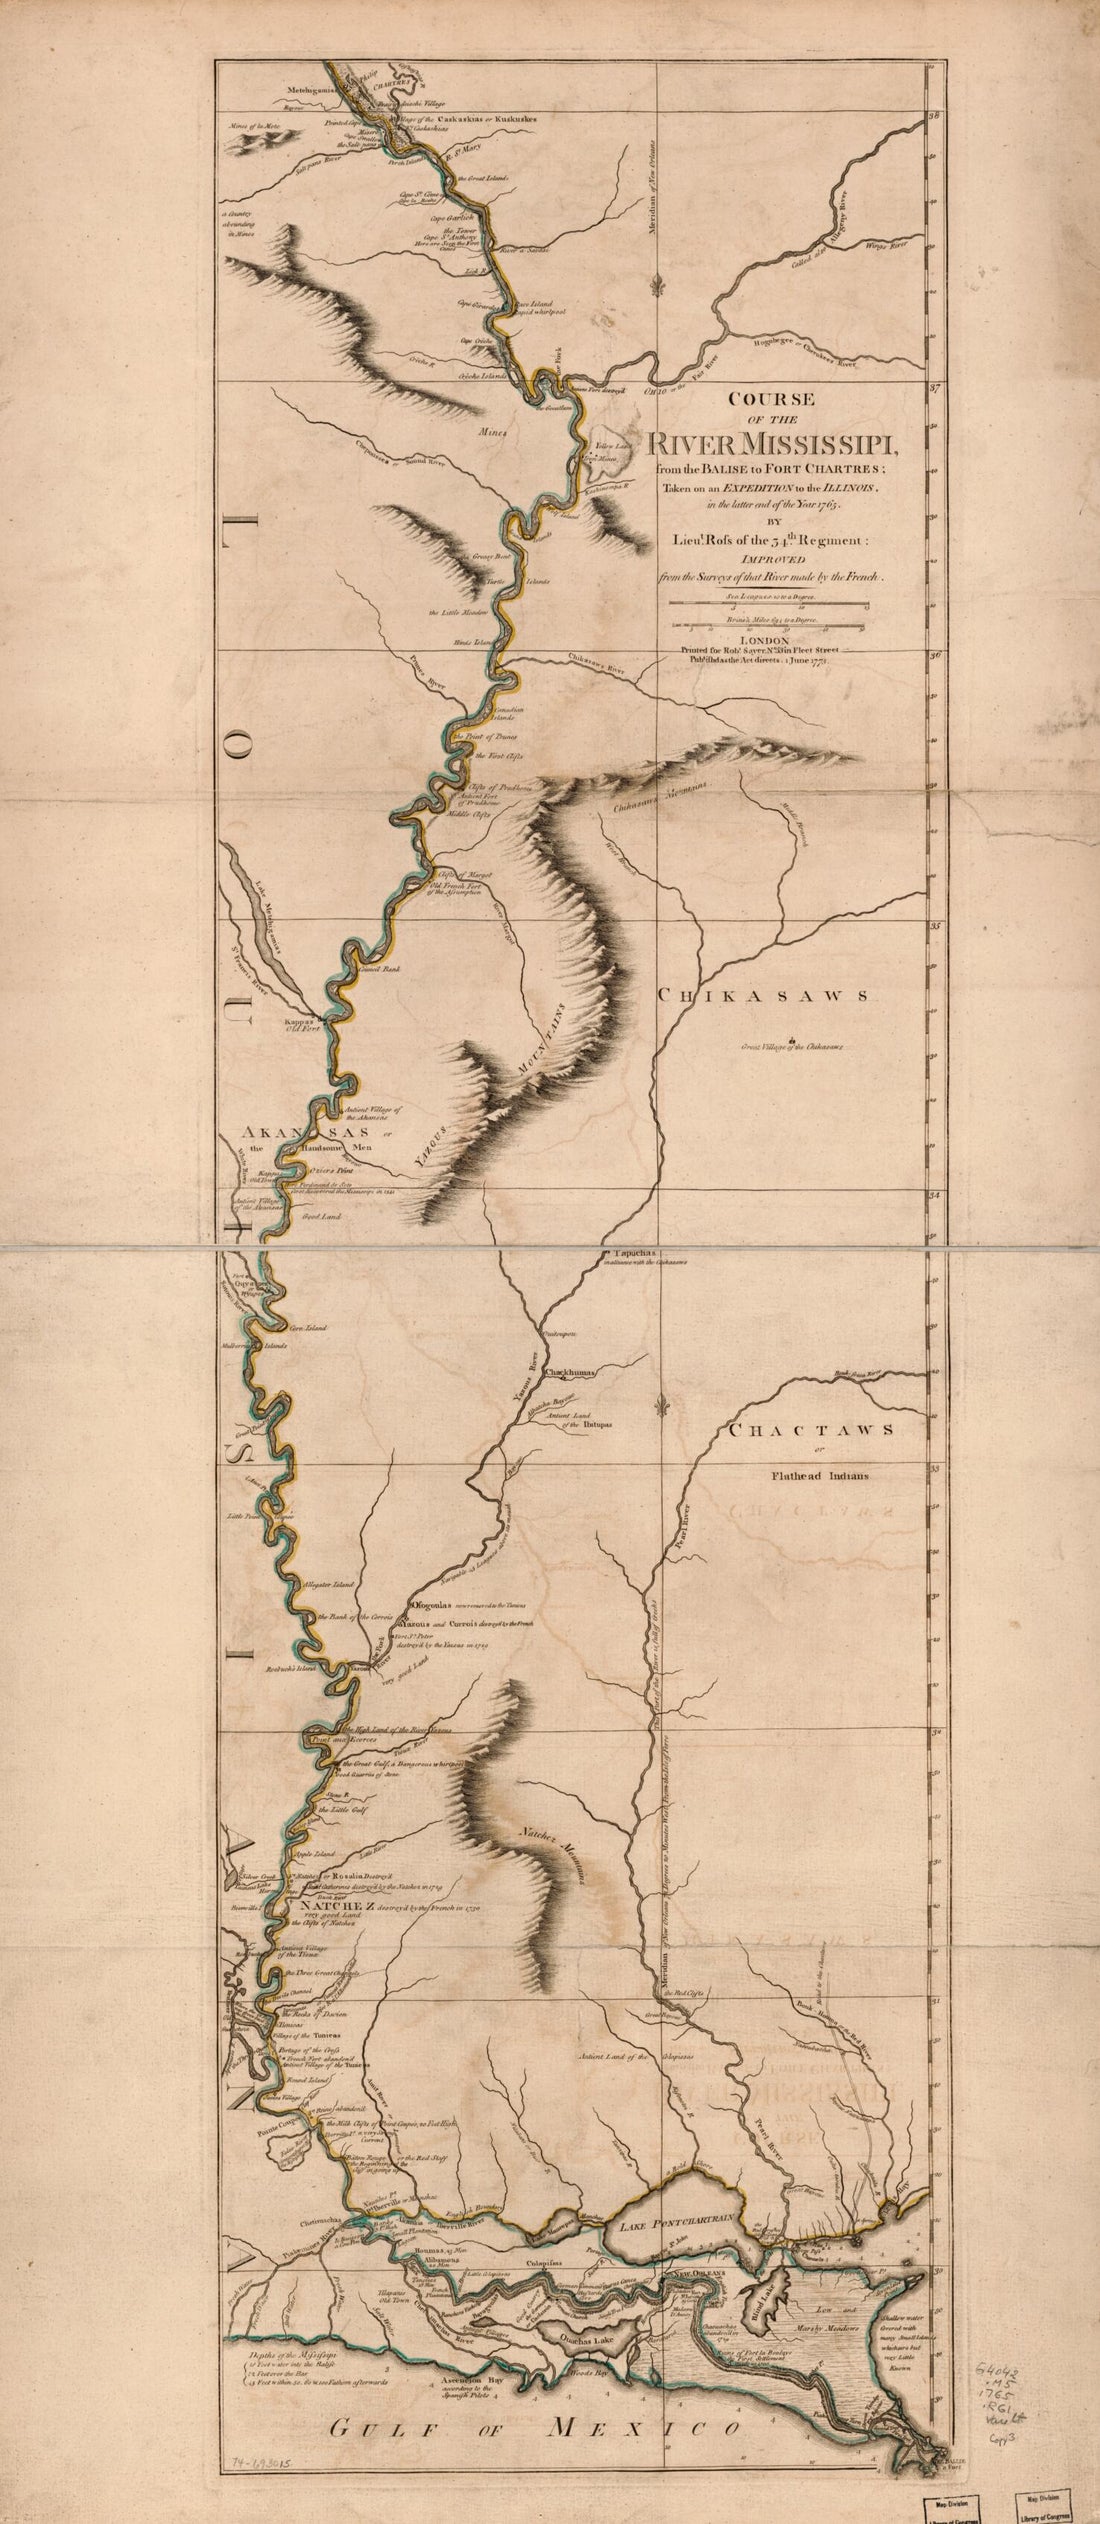 This old map of Course of the River Mississipi from the Balise to Fort Chartres; Taken On an Expedition to the Illinois, In the Latter End of the Year 1765 from 1780 was created by  Ross, Robert Sayer in 1780